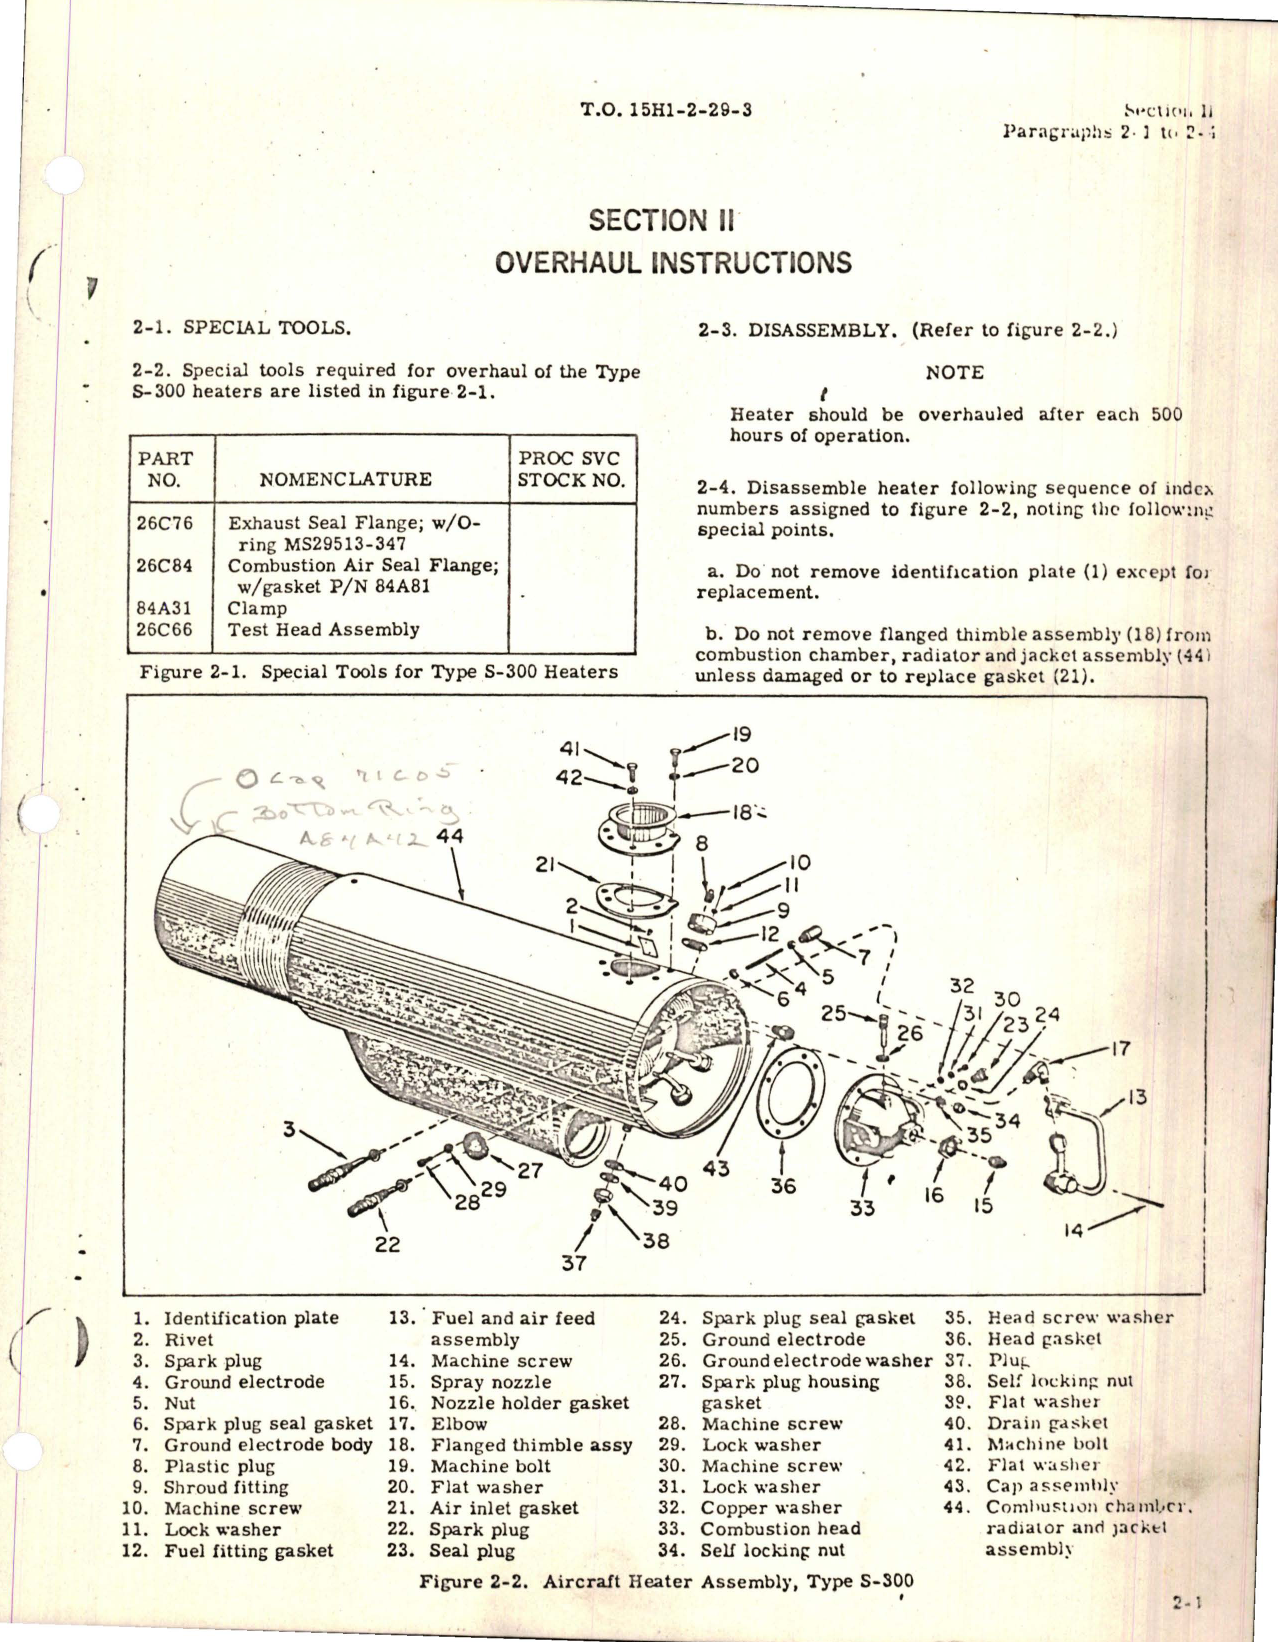 Sample page 5 from AirCorps Library document: Overhaul Manual for Aircraft Heater - Part N88A92